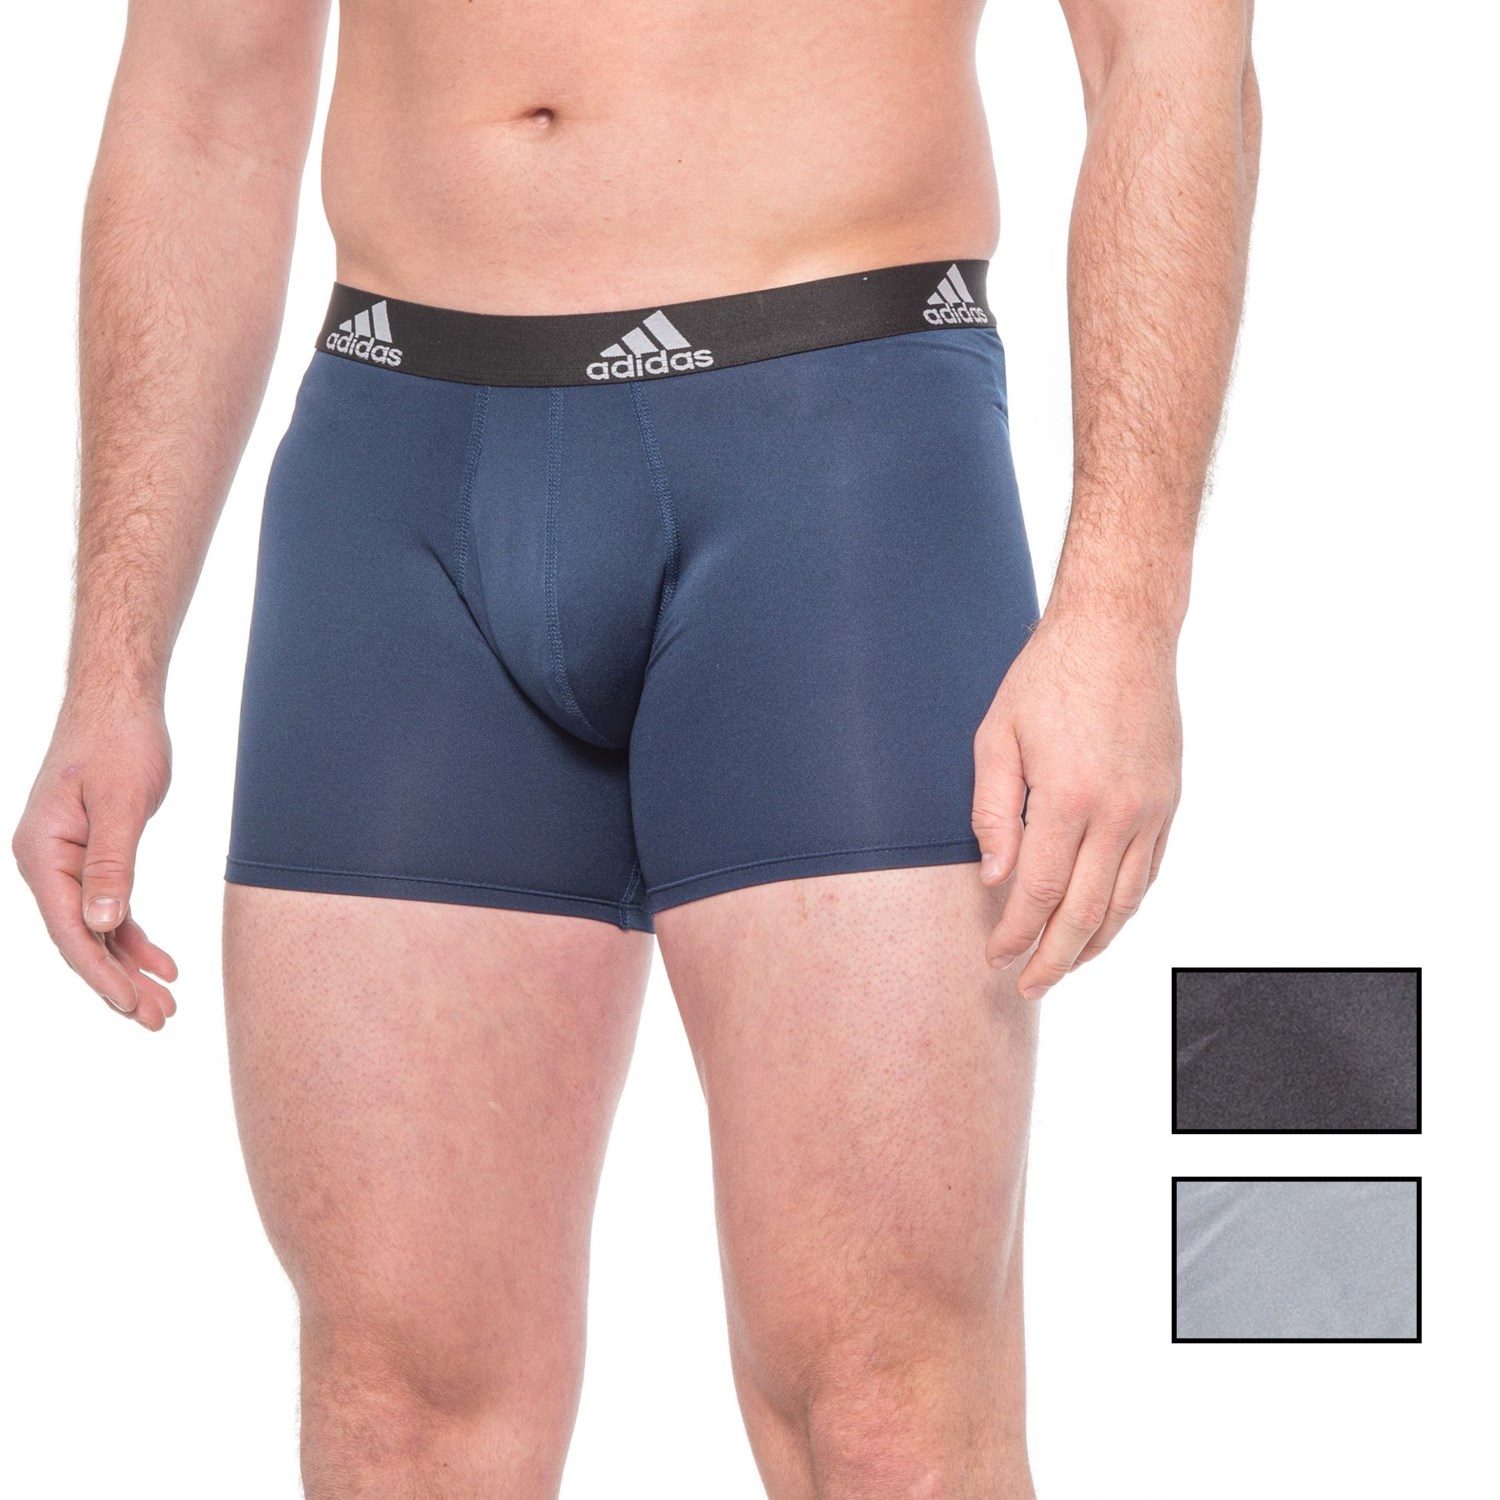 adidas men's climacool 7 midway briefs 01